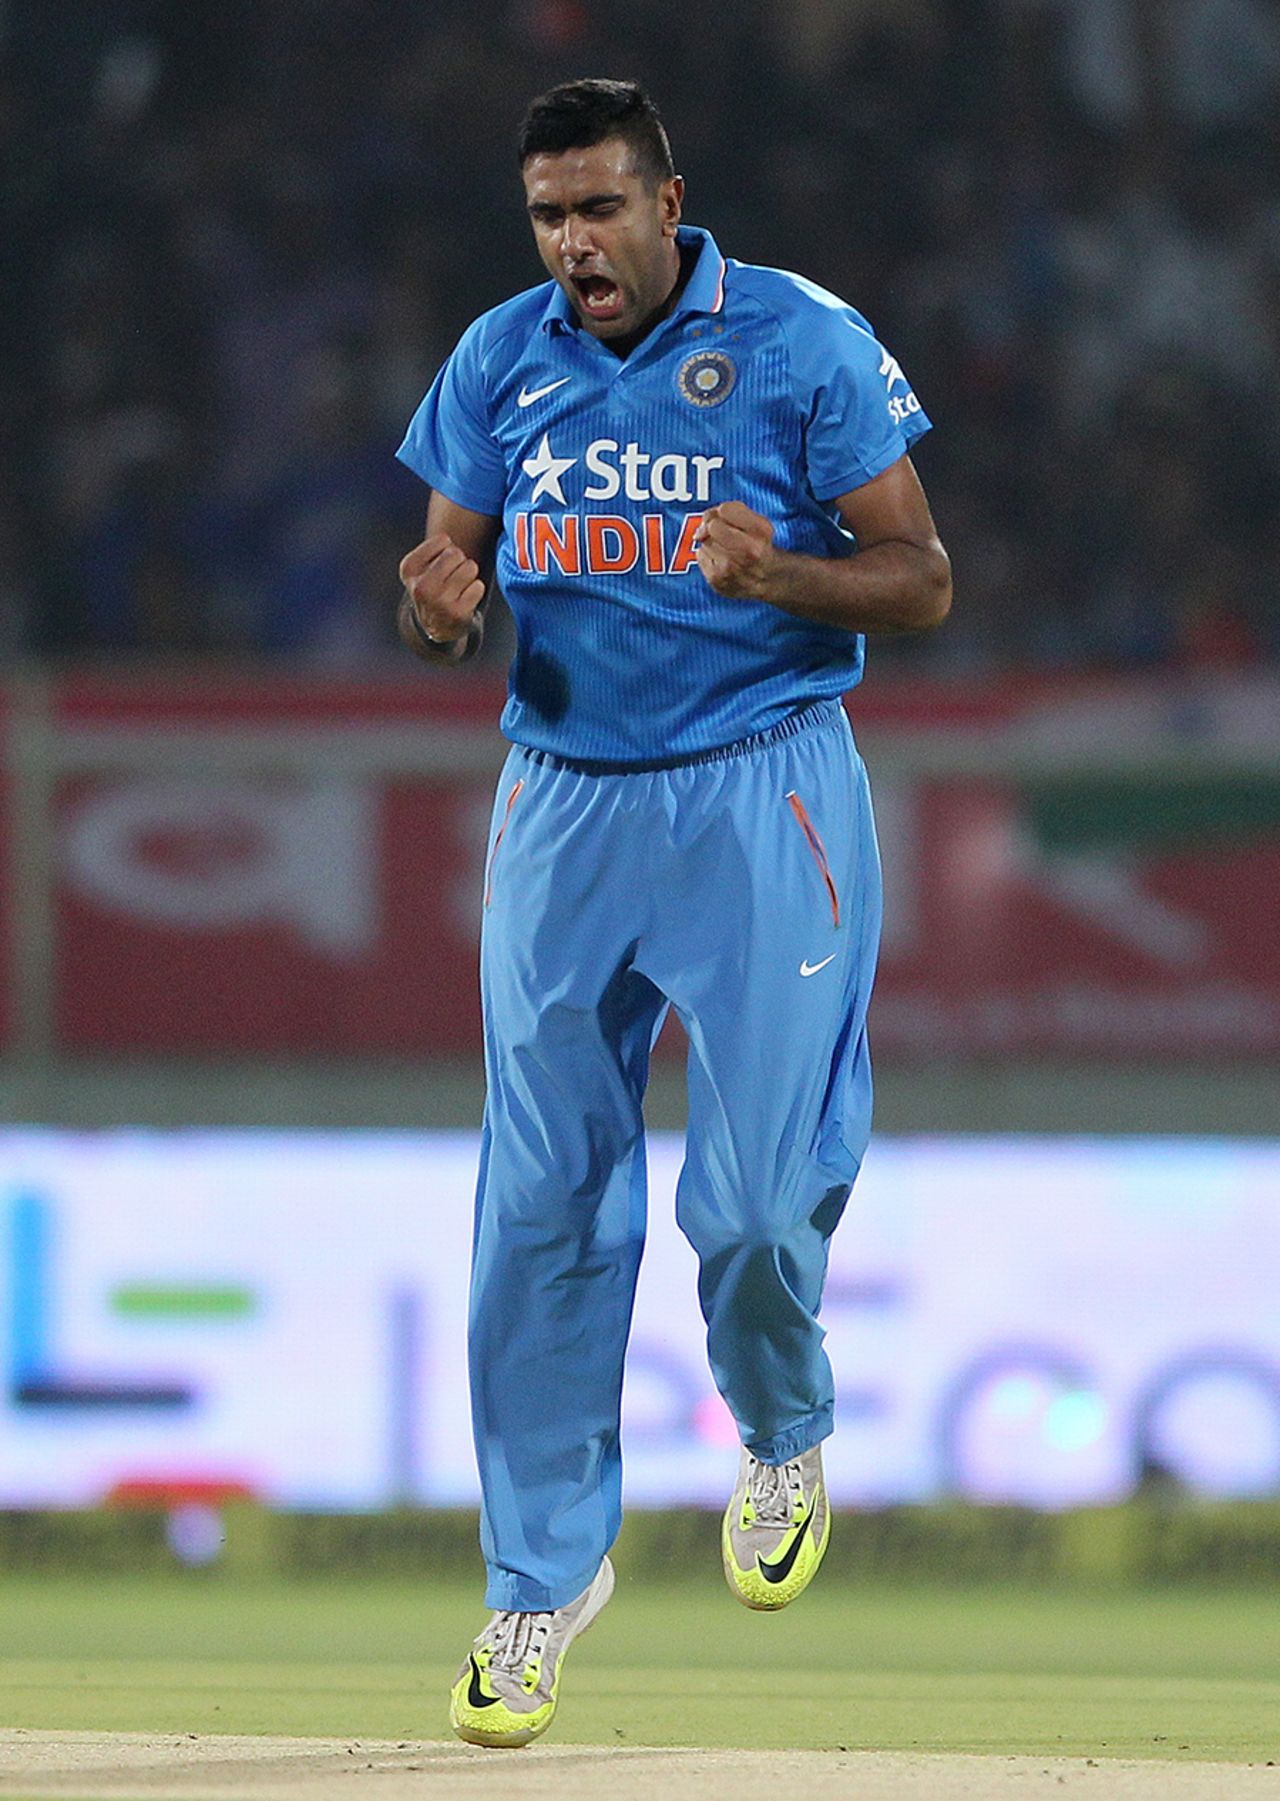 R Ashwin is pumped after dismissing Tillakaratne Dilshan in the first over, India v Sri Lanka, 3rd T20I, Visakhapatnam, February 14, 2016